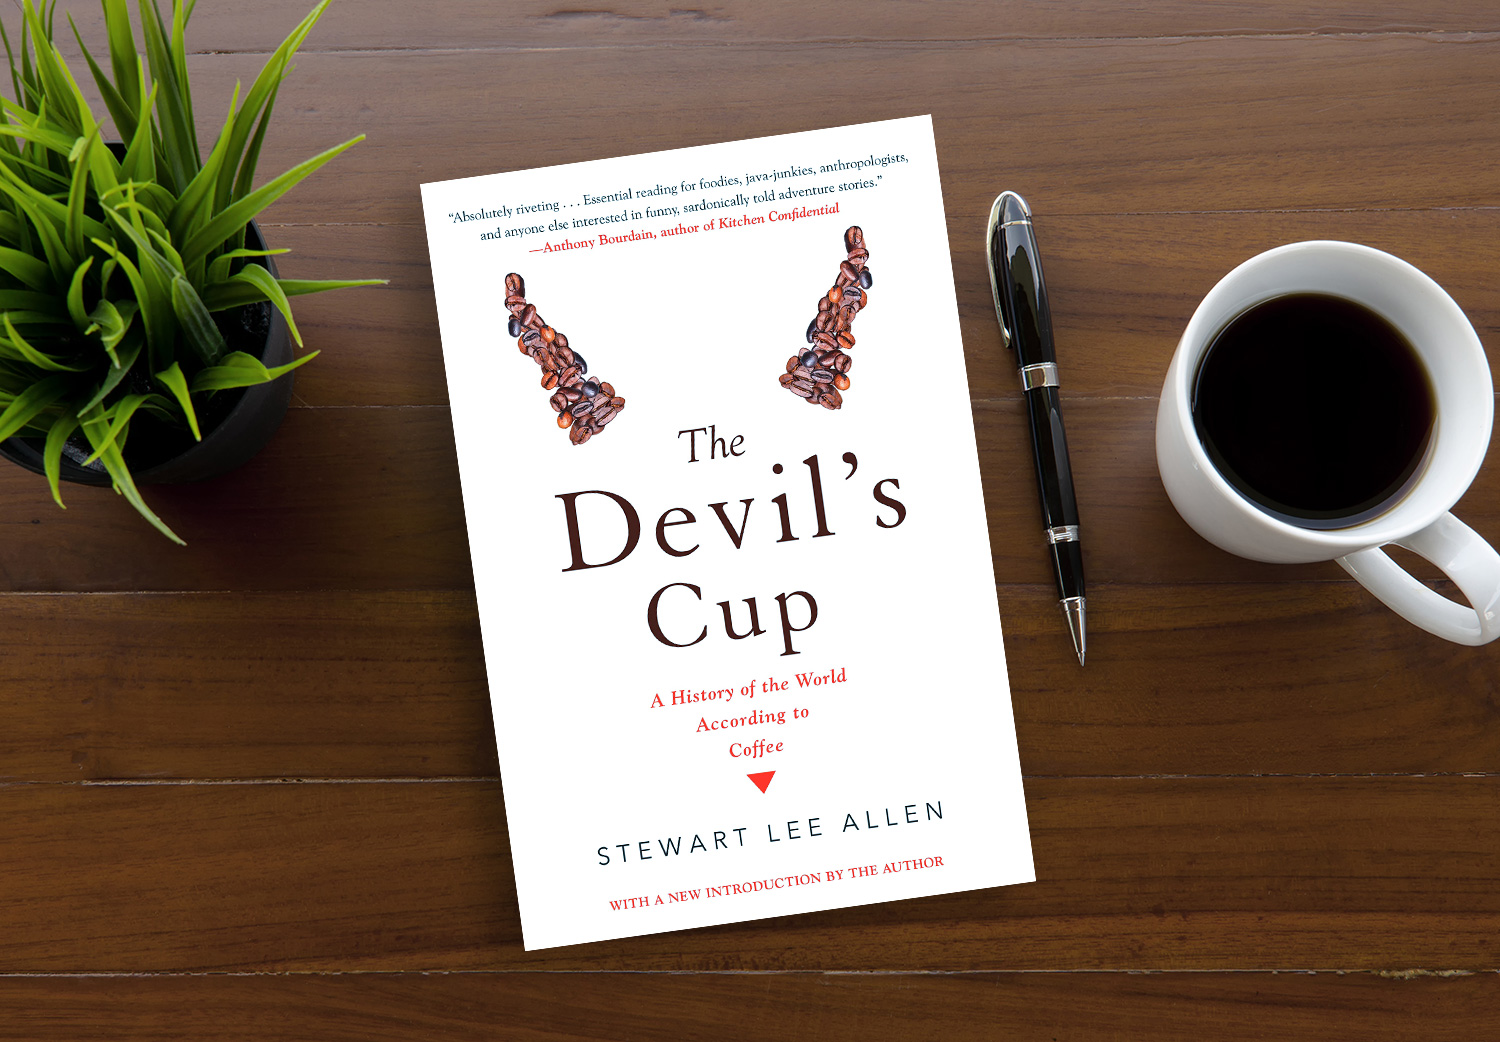 The Devil’s Cup by Stewart Lee Allen on a wooden table.